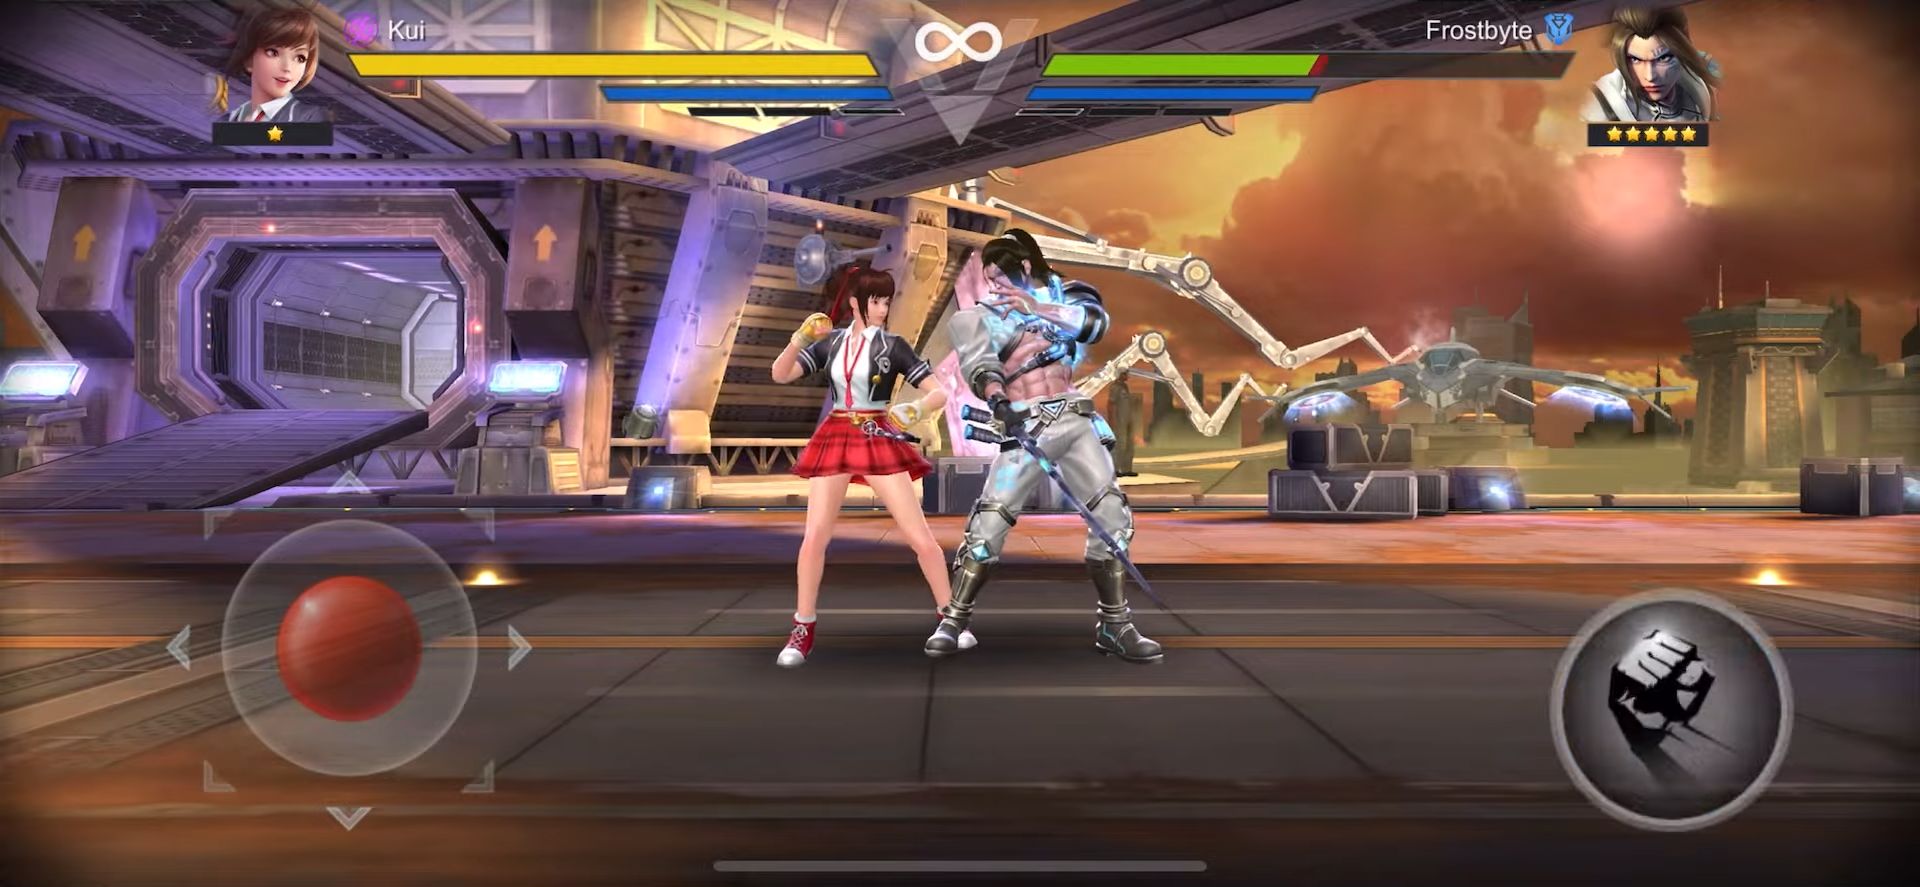 Baixar Final Fighter: Fighting Game para Android grátis.